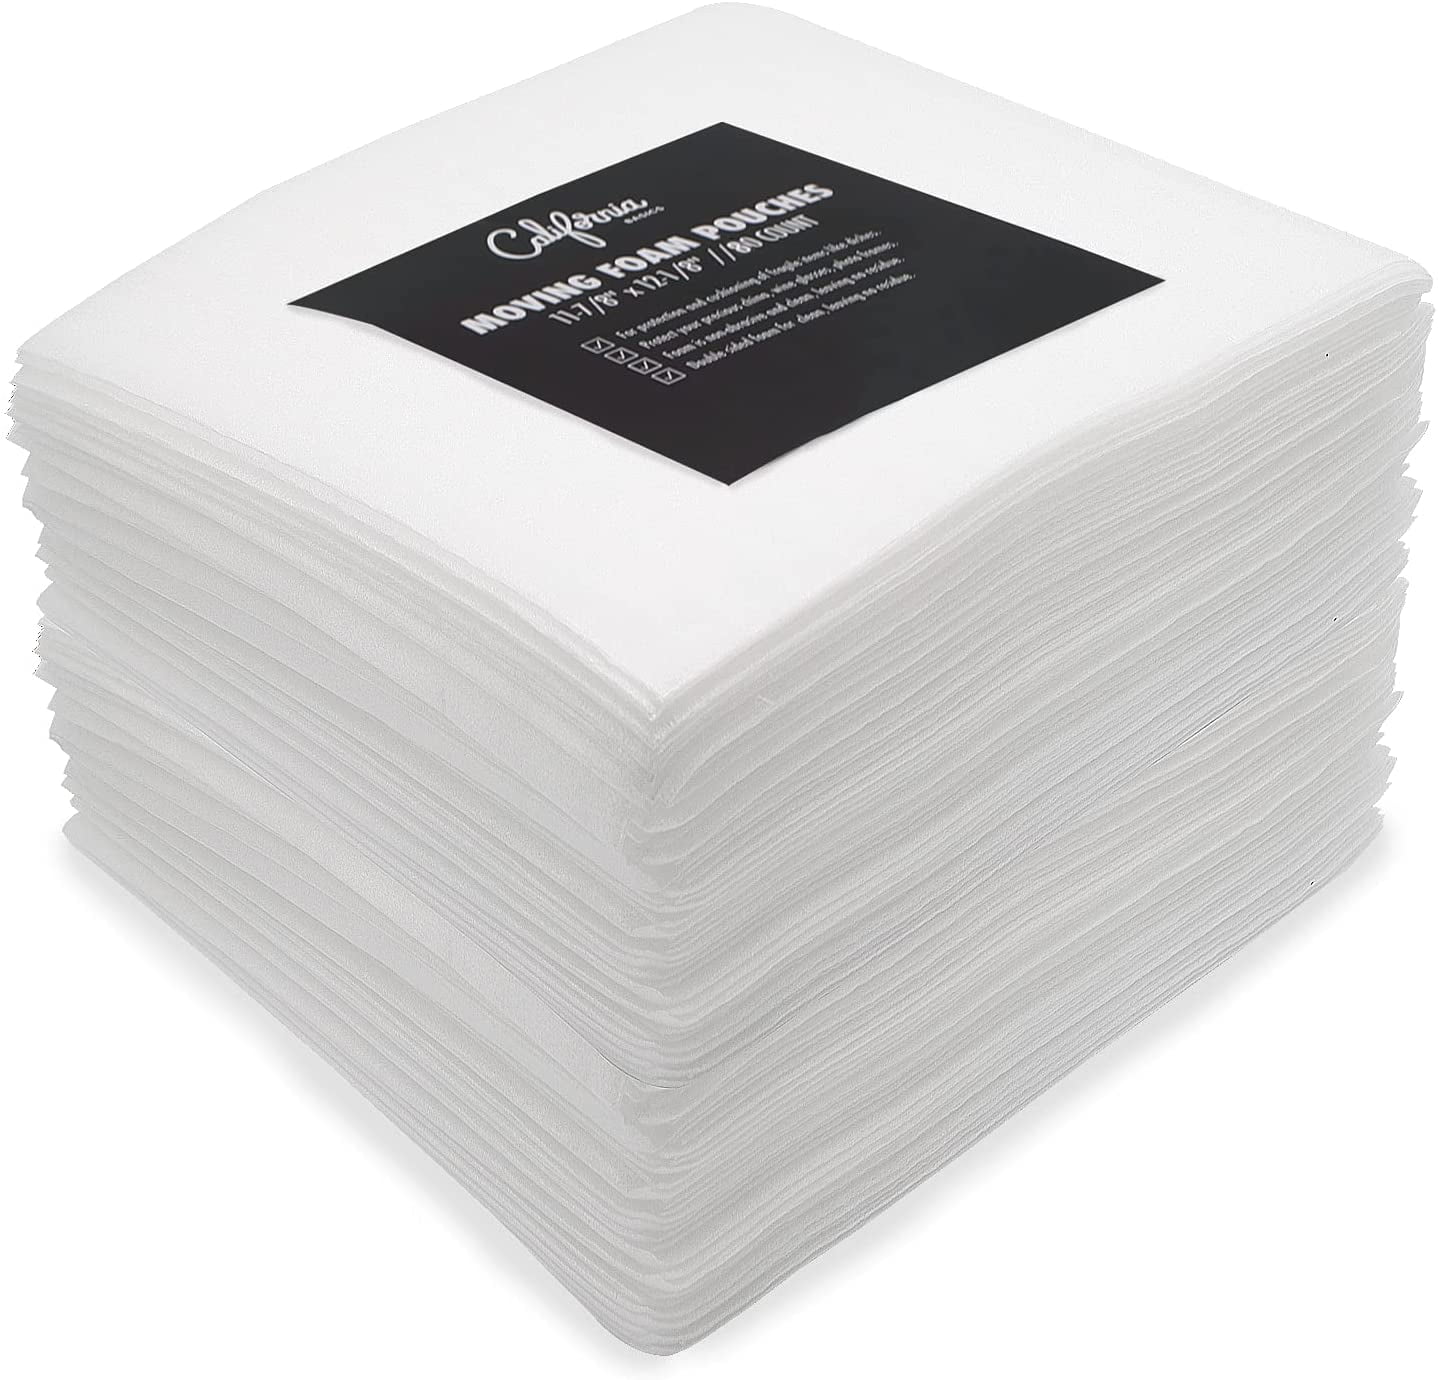 Pacific Mailer Foam Wrap Sheets, 12 x 12 inch, 50 Pack Foam Sheets Cushionin Packing Supplies for Moving Storage Portable